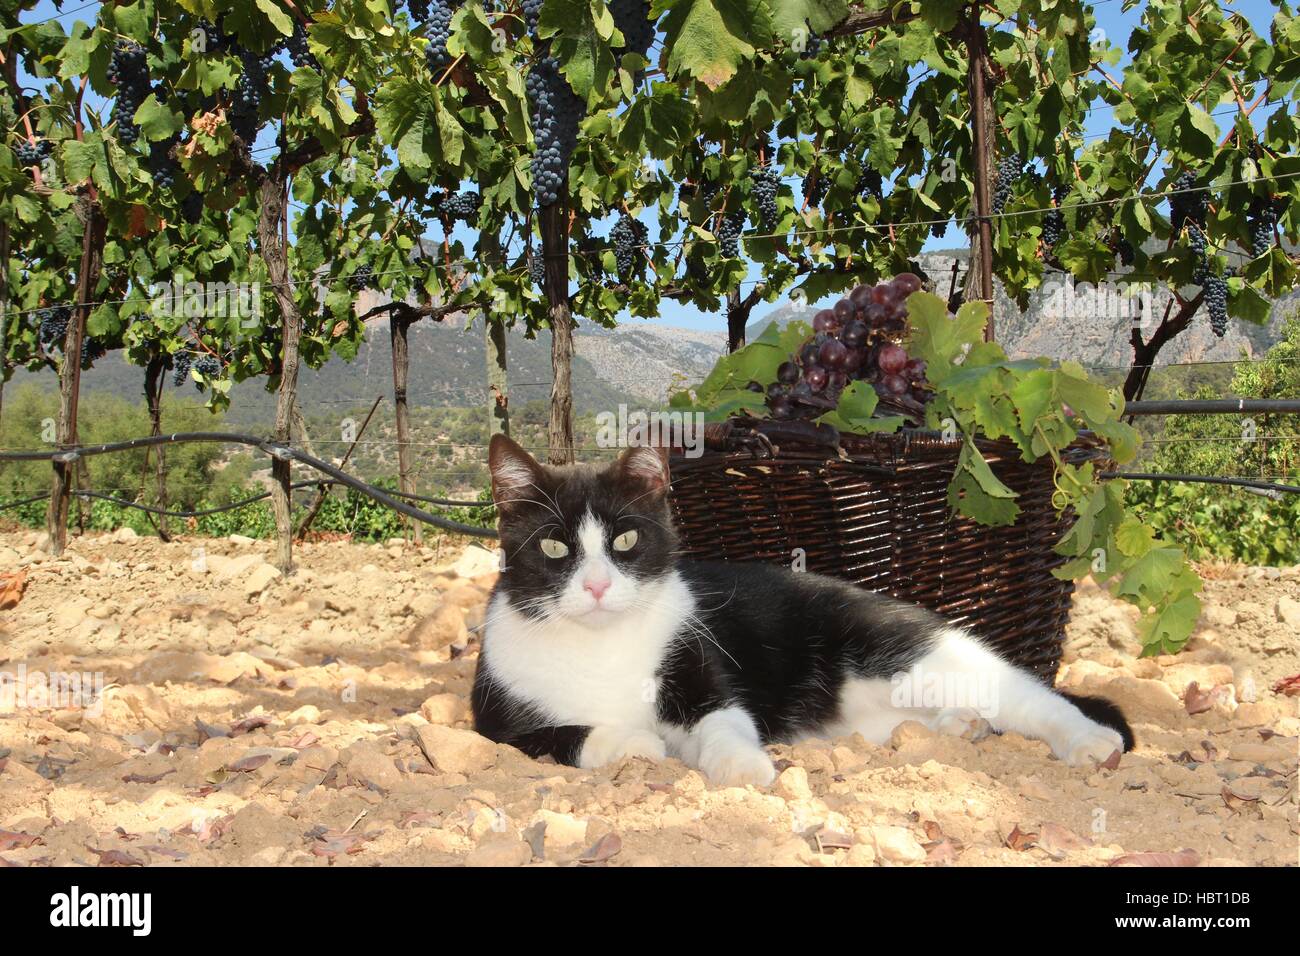 domestic cat, tuxedo, black and white, lies in a vineyard in the Tramuntana Mountains of Mallorca, Baleares Stock Photo